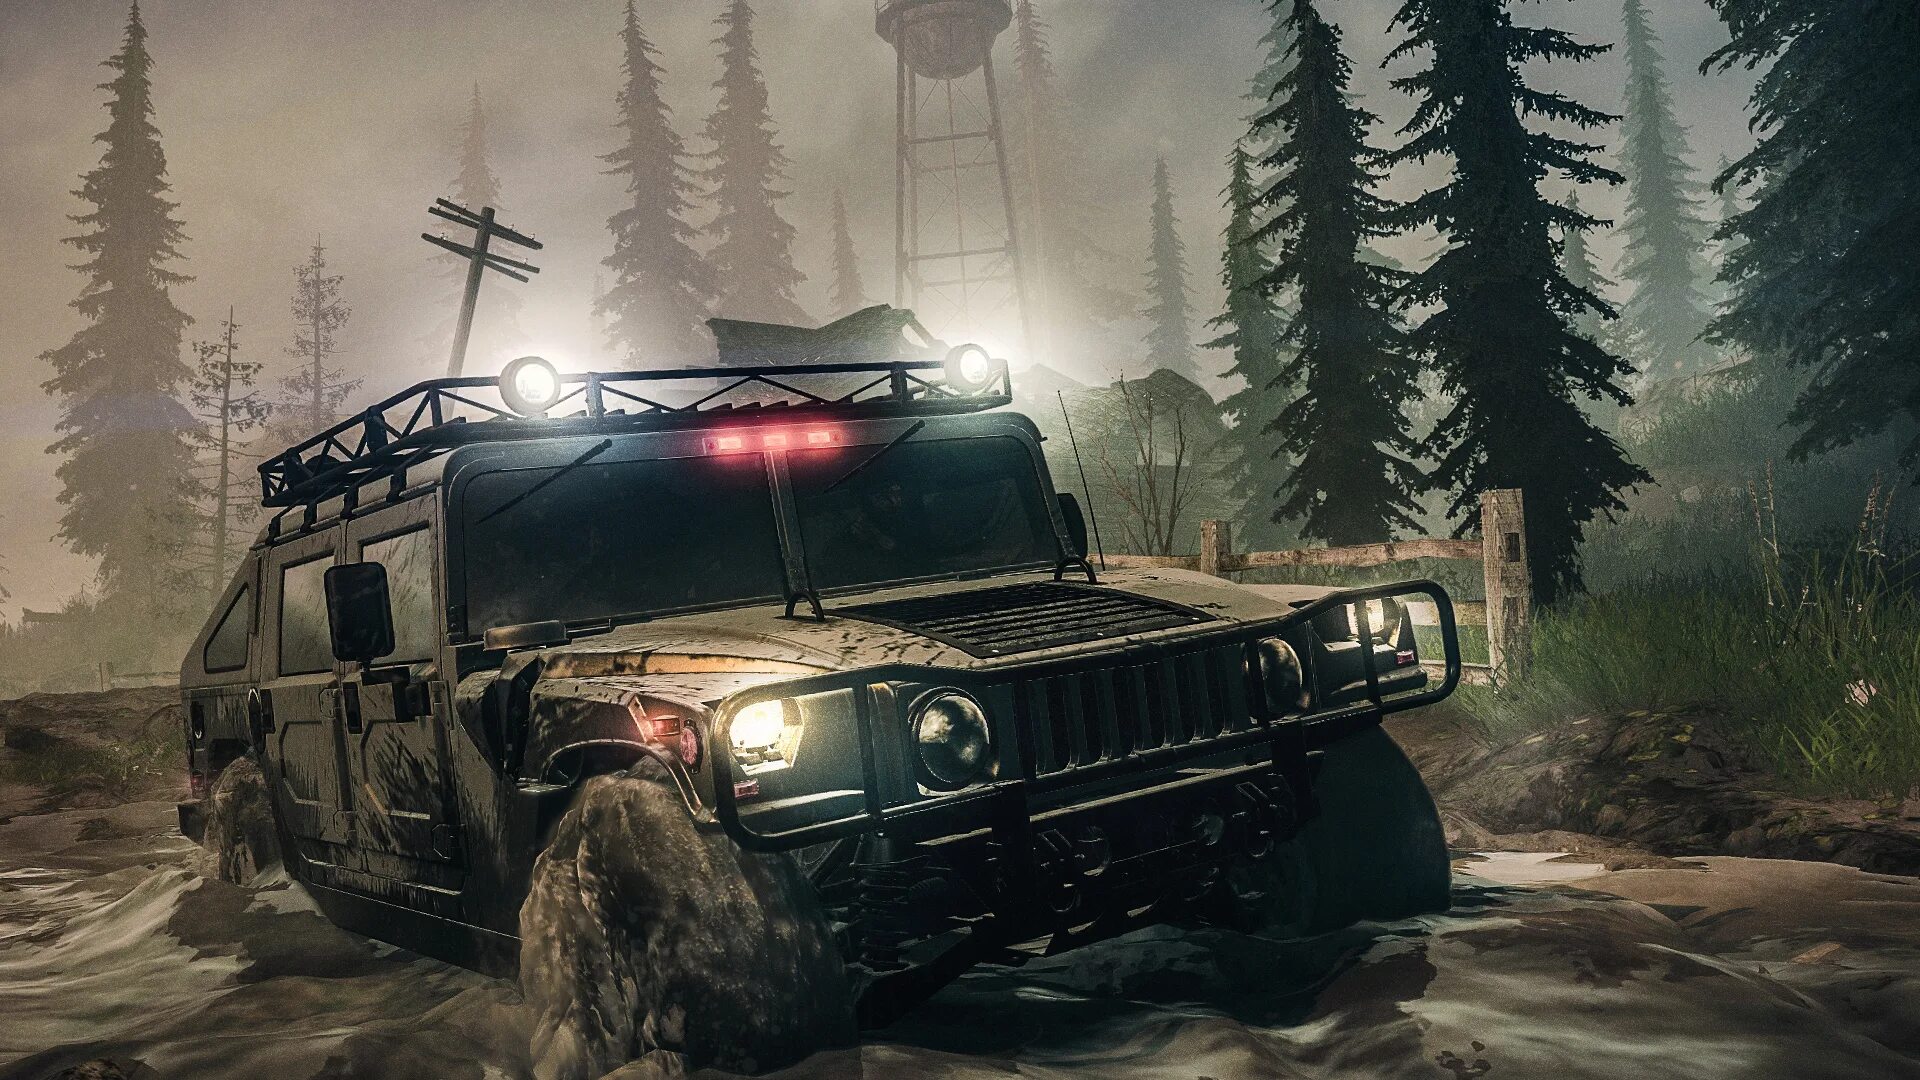 Игра Spin Tires MUDRUNNER. SPINTIRES Mud Runner. SPINTIRES: MUDRUNNER - American Wilds. MUDRUNNER American Wilds Edition. Expedition mudrunner nintendo